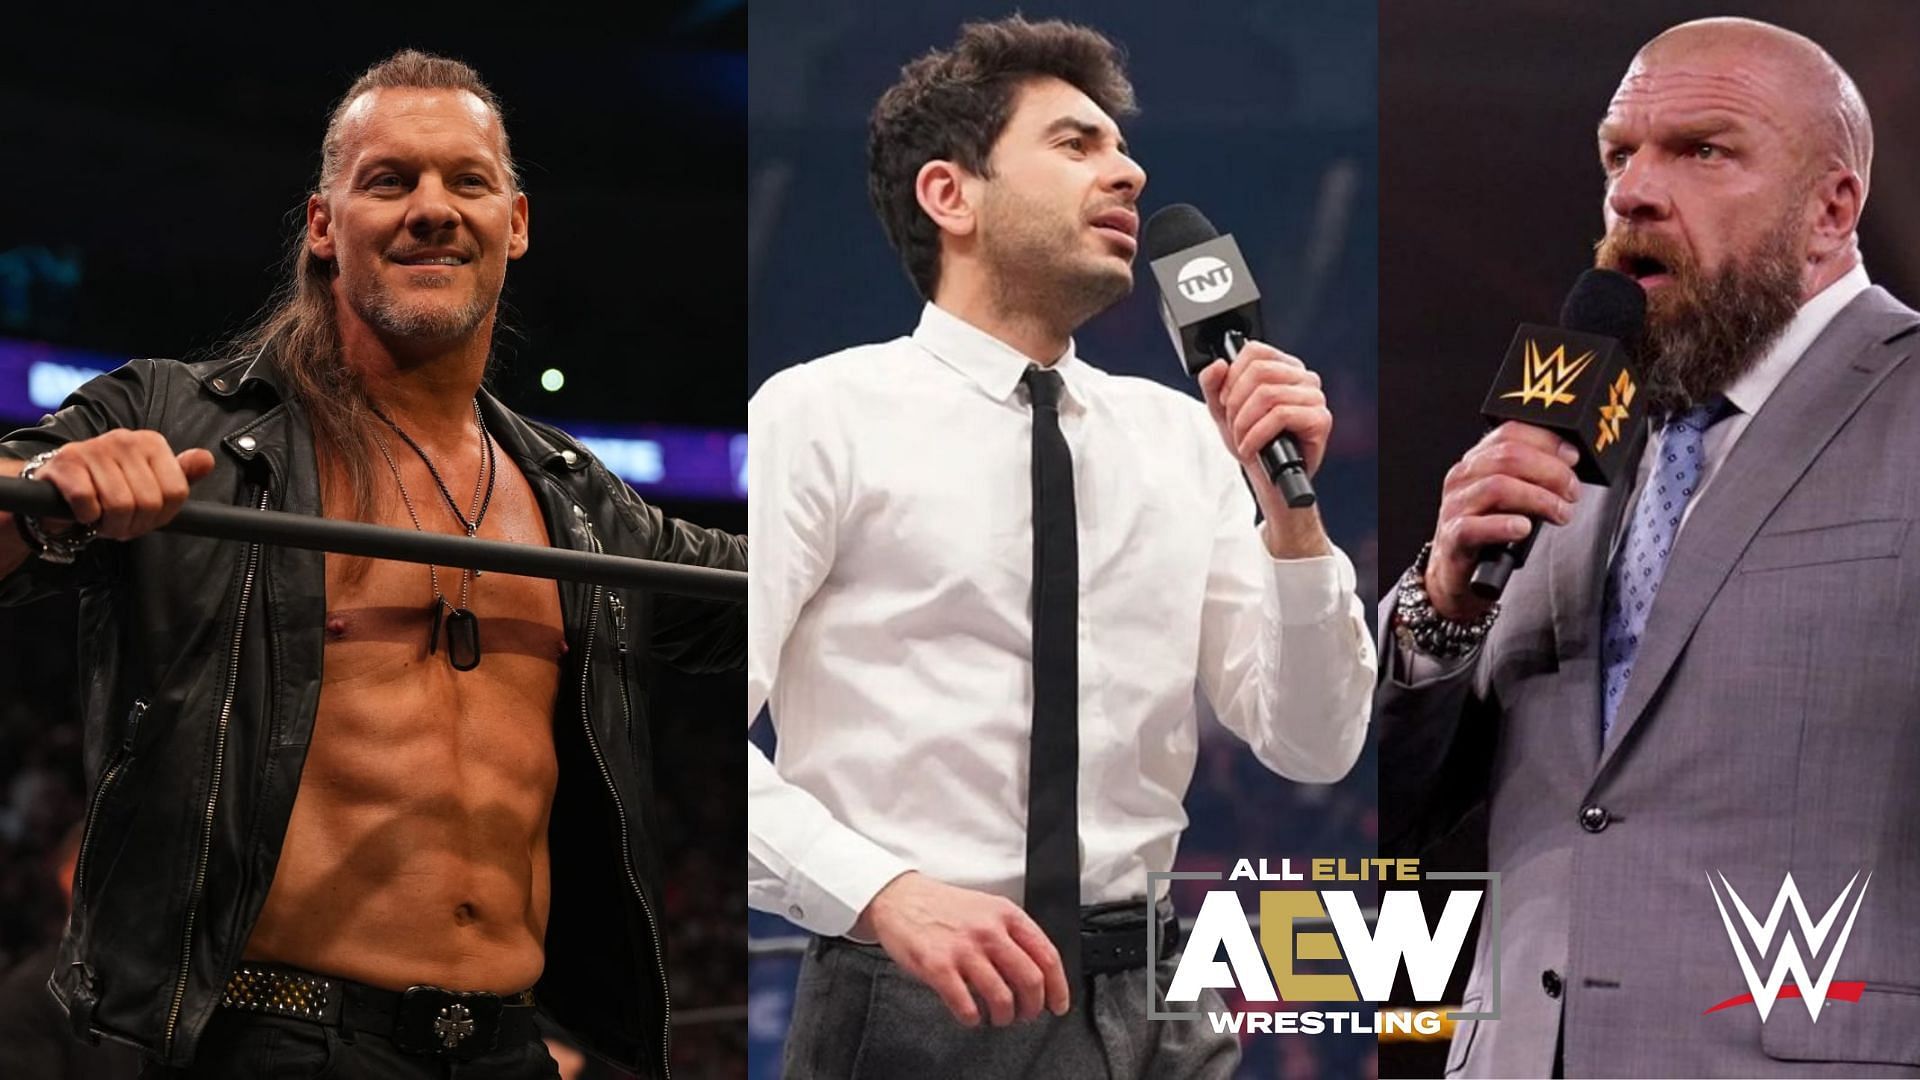 Chris Jericho is set to stay in AEW for the foreseeable future